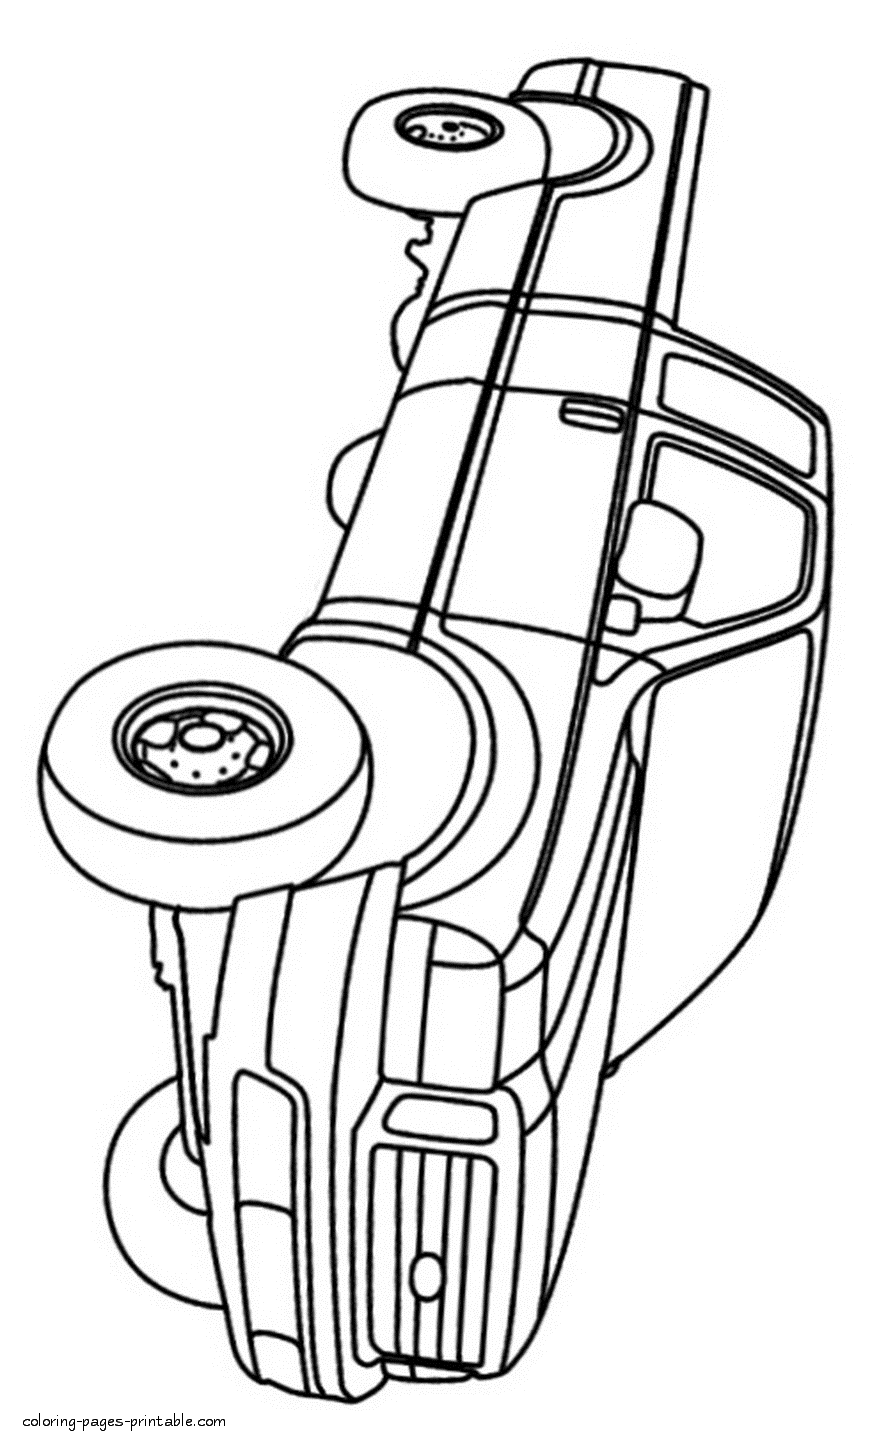 Pickup truck. Ford cars coloring pages